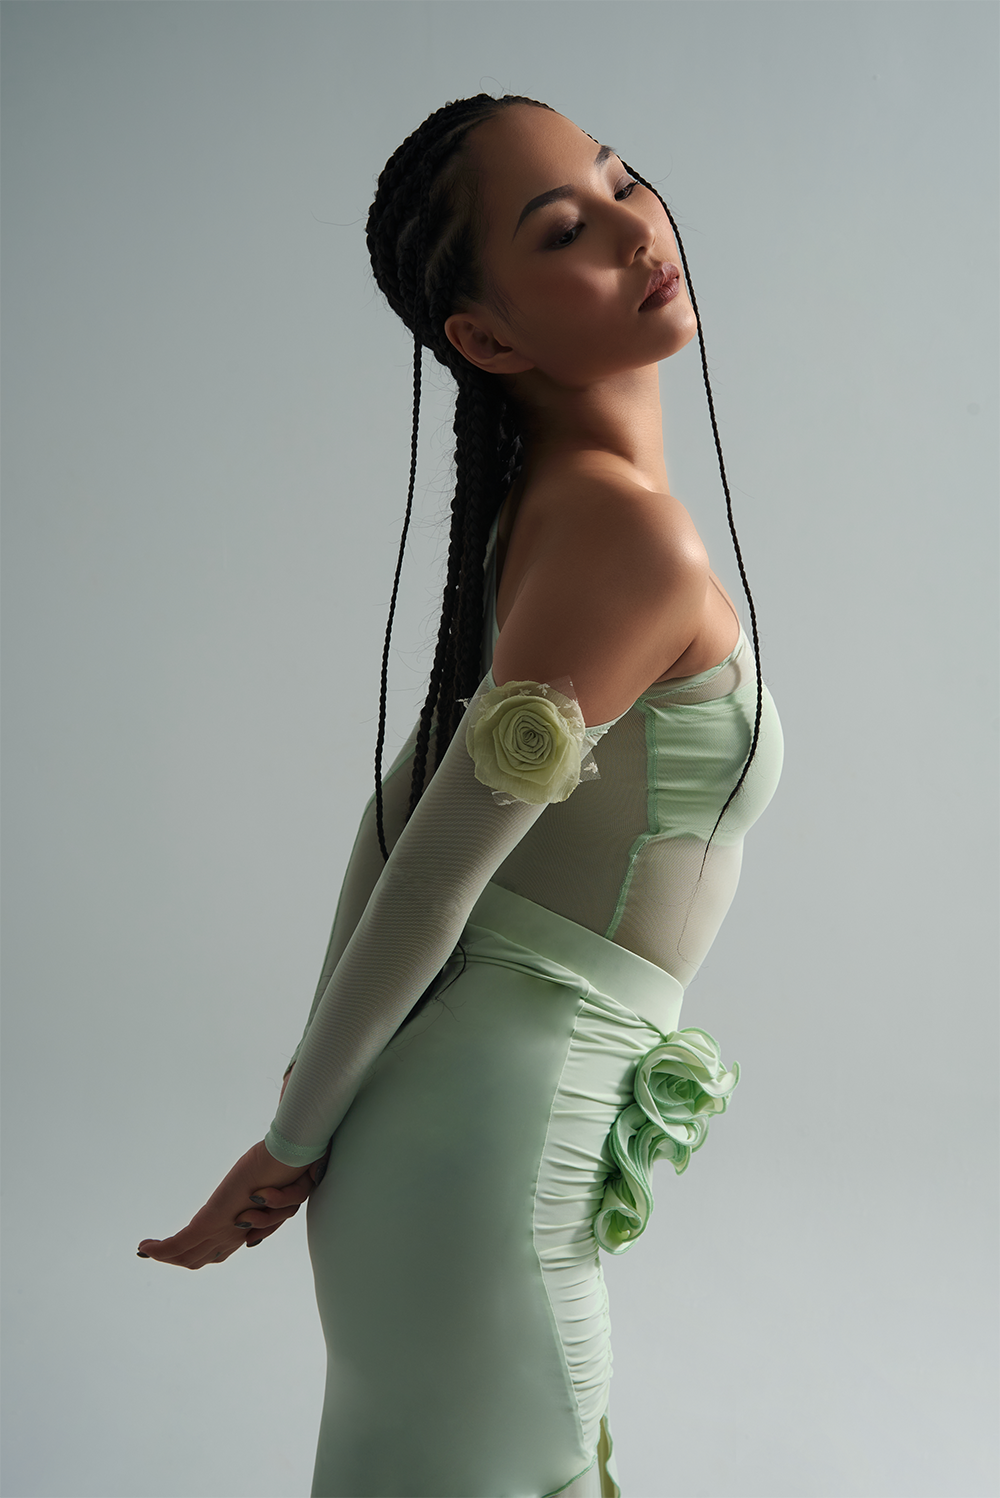 Experience the passion of dance with the DANCE QUEEN 656-3 Mint Mambo Leotard. The off shoulder design and delicate flower details add a touch of elegance, while the long sleeves provide coverage and movement. Feel confident and stylish while performing your best in this ballroom leotard.